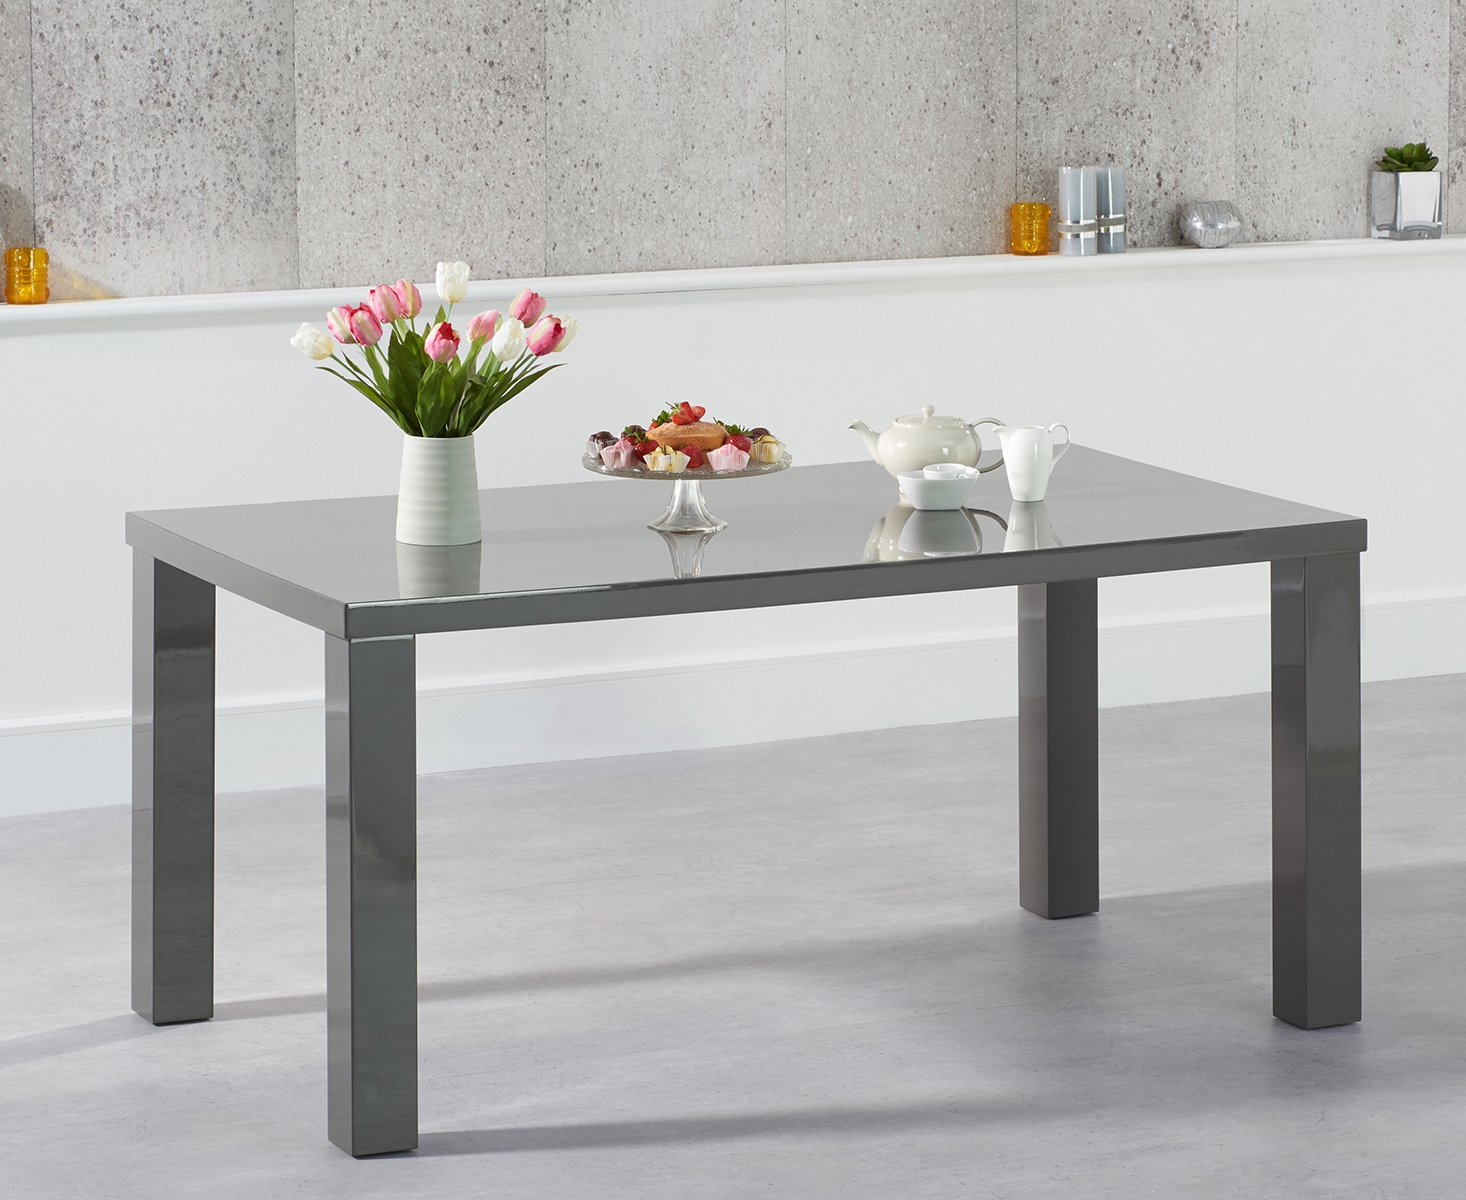 Photo 1 of Seattle 160cm dark grey high gloss dining table with malaga benches